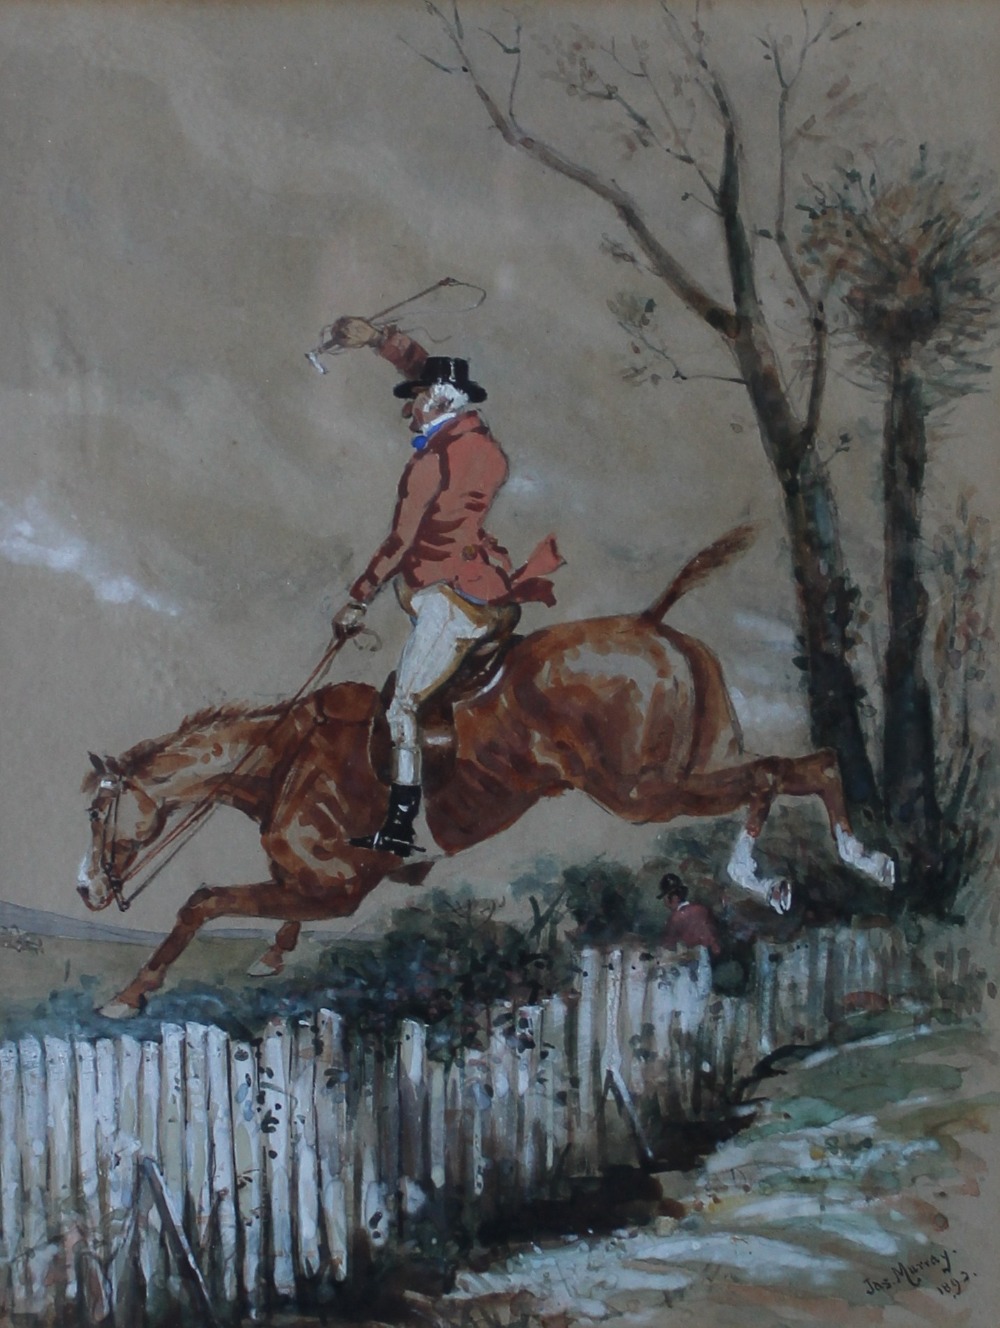 James Murray
A huntsman jumping a fence
Watercolour
Signed and dated 1892
22 x 17cm
Together with - Image 3 of 3